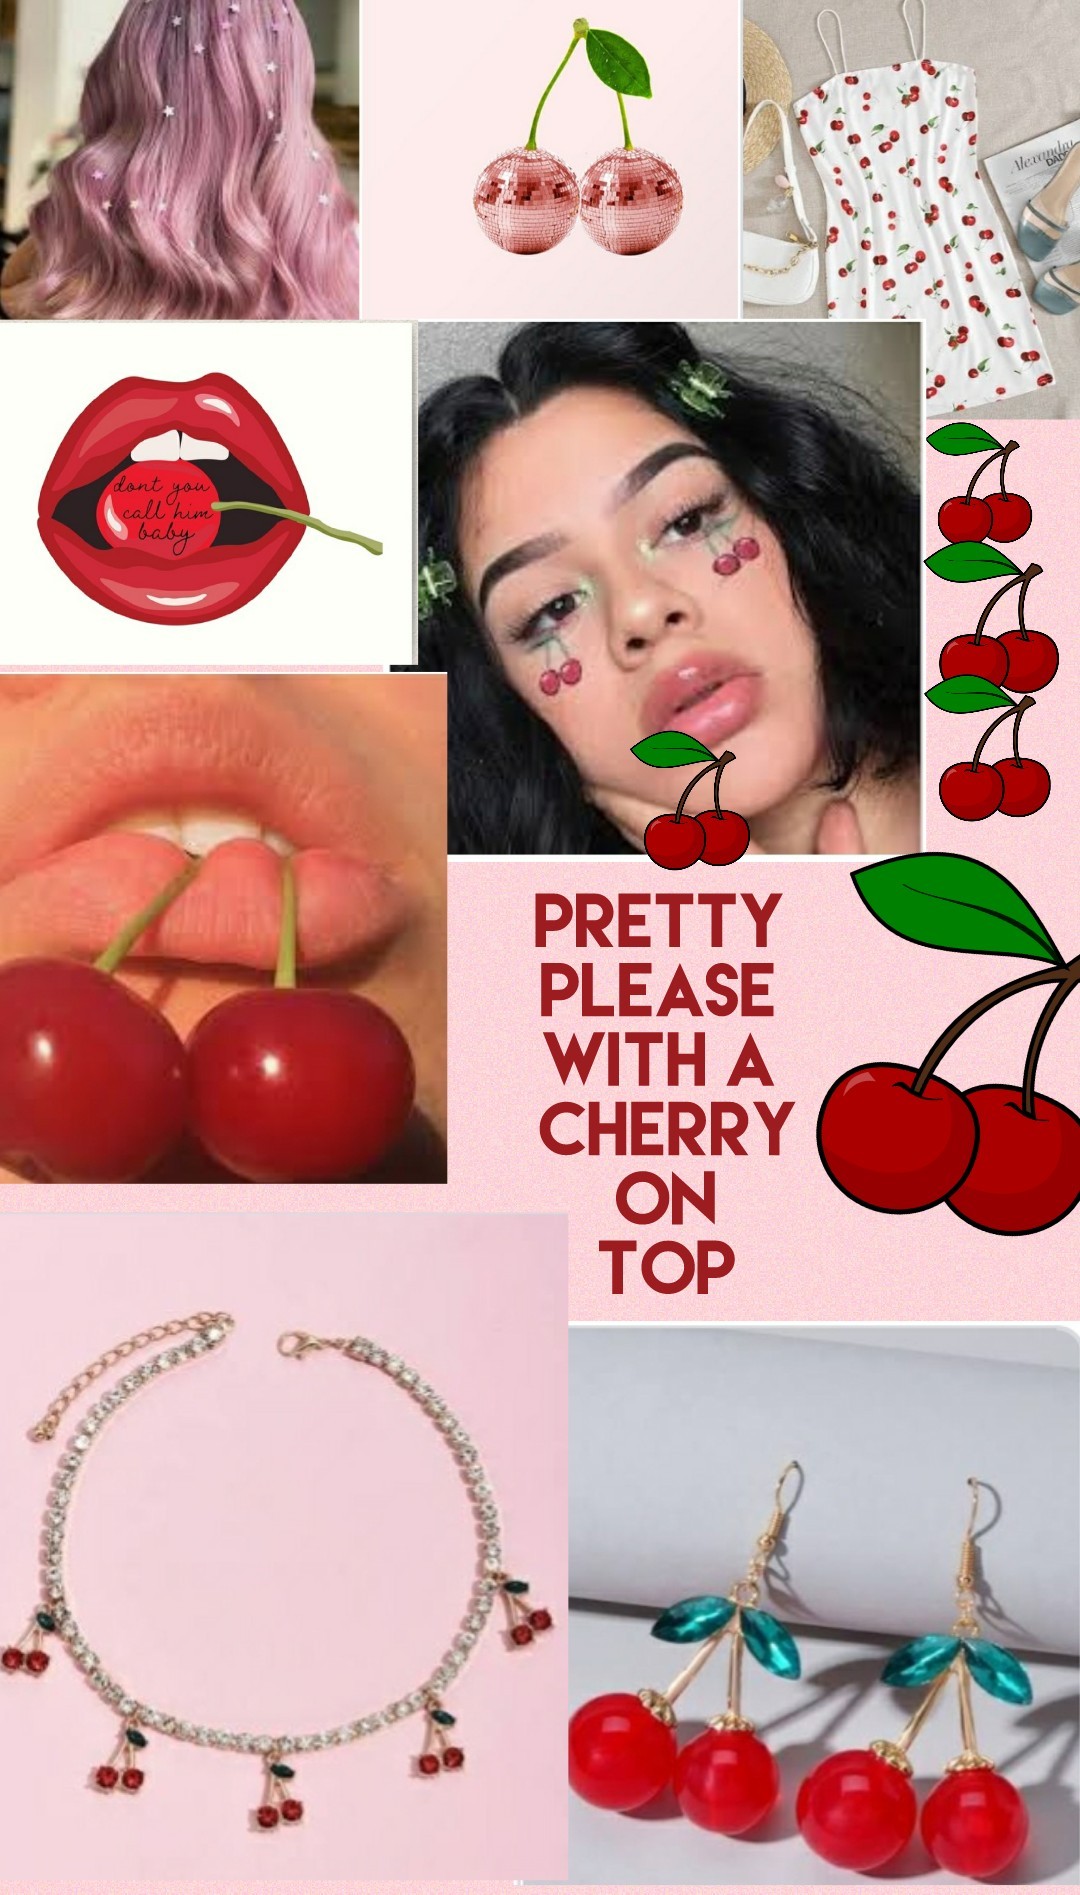 🍒tap🍒
could you pretty please follow with a cherry on top......hey guys sorry I haven't been active but if remix with a cherry i will give you a shout